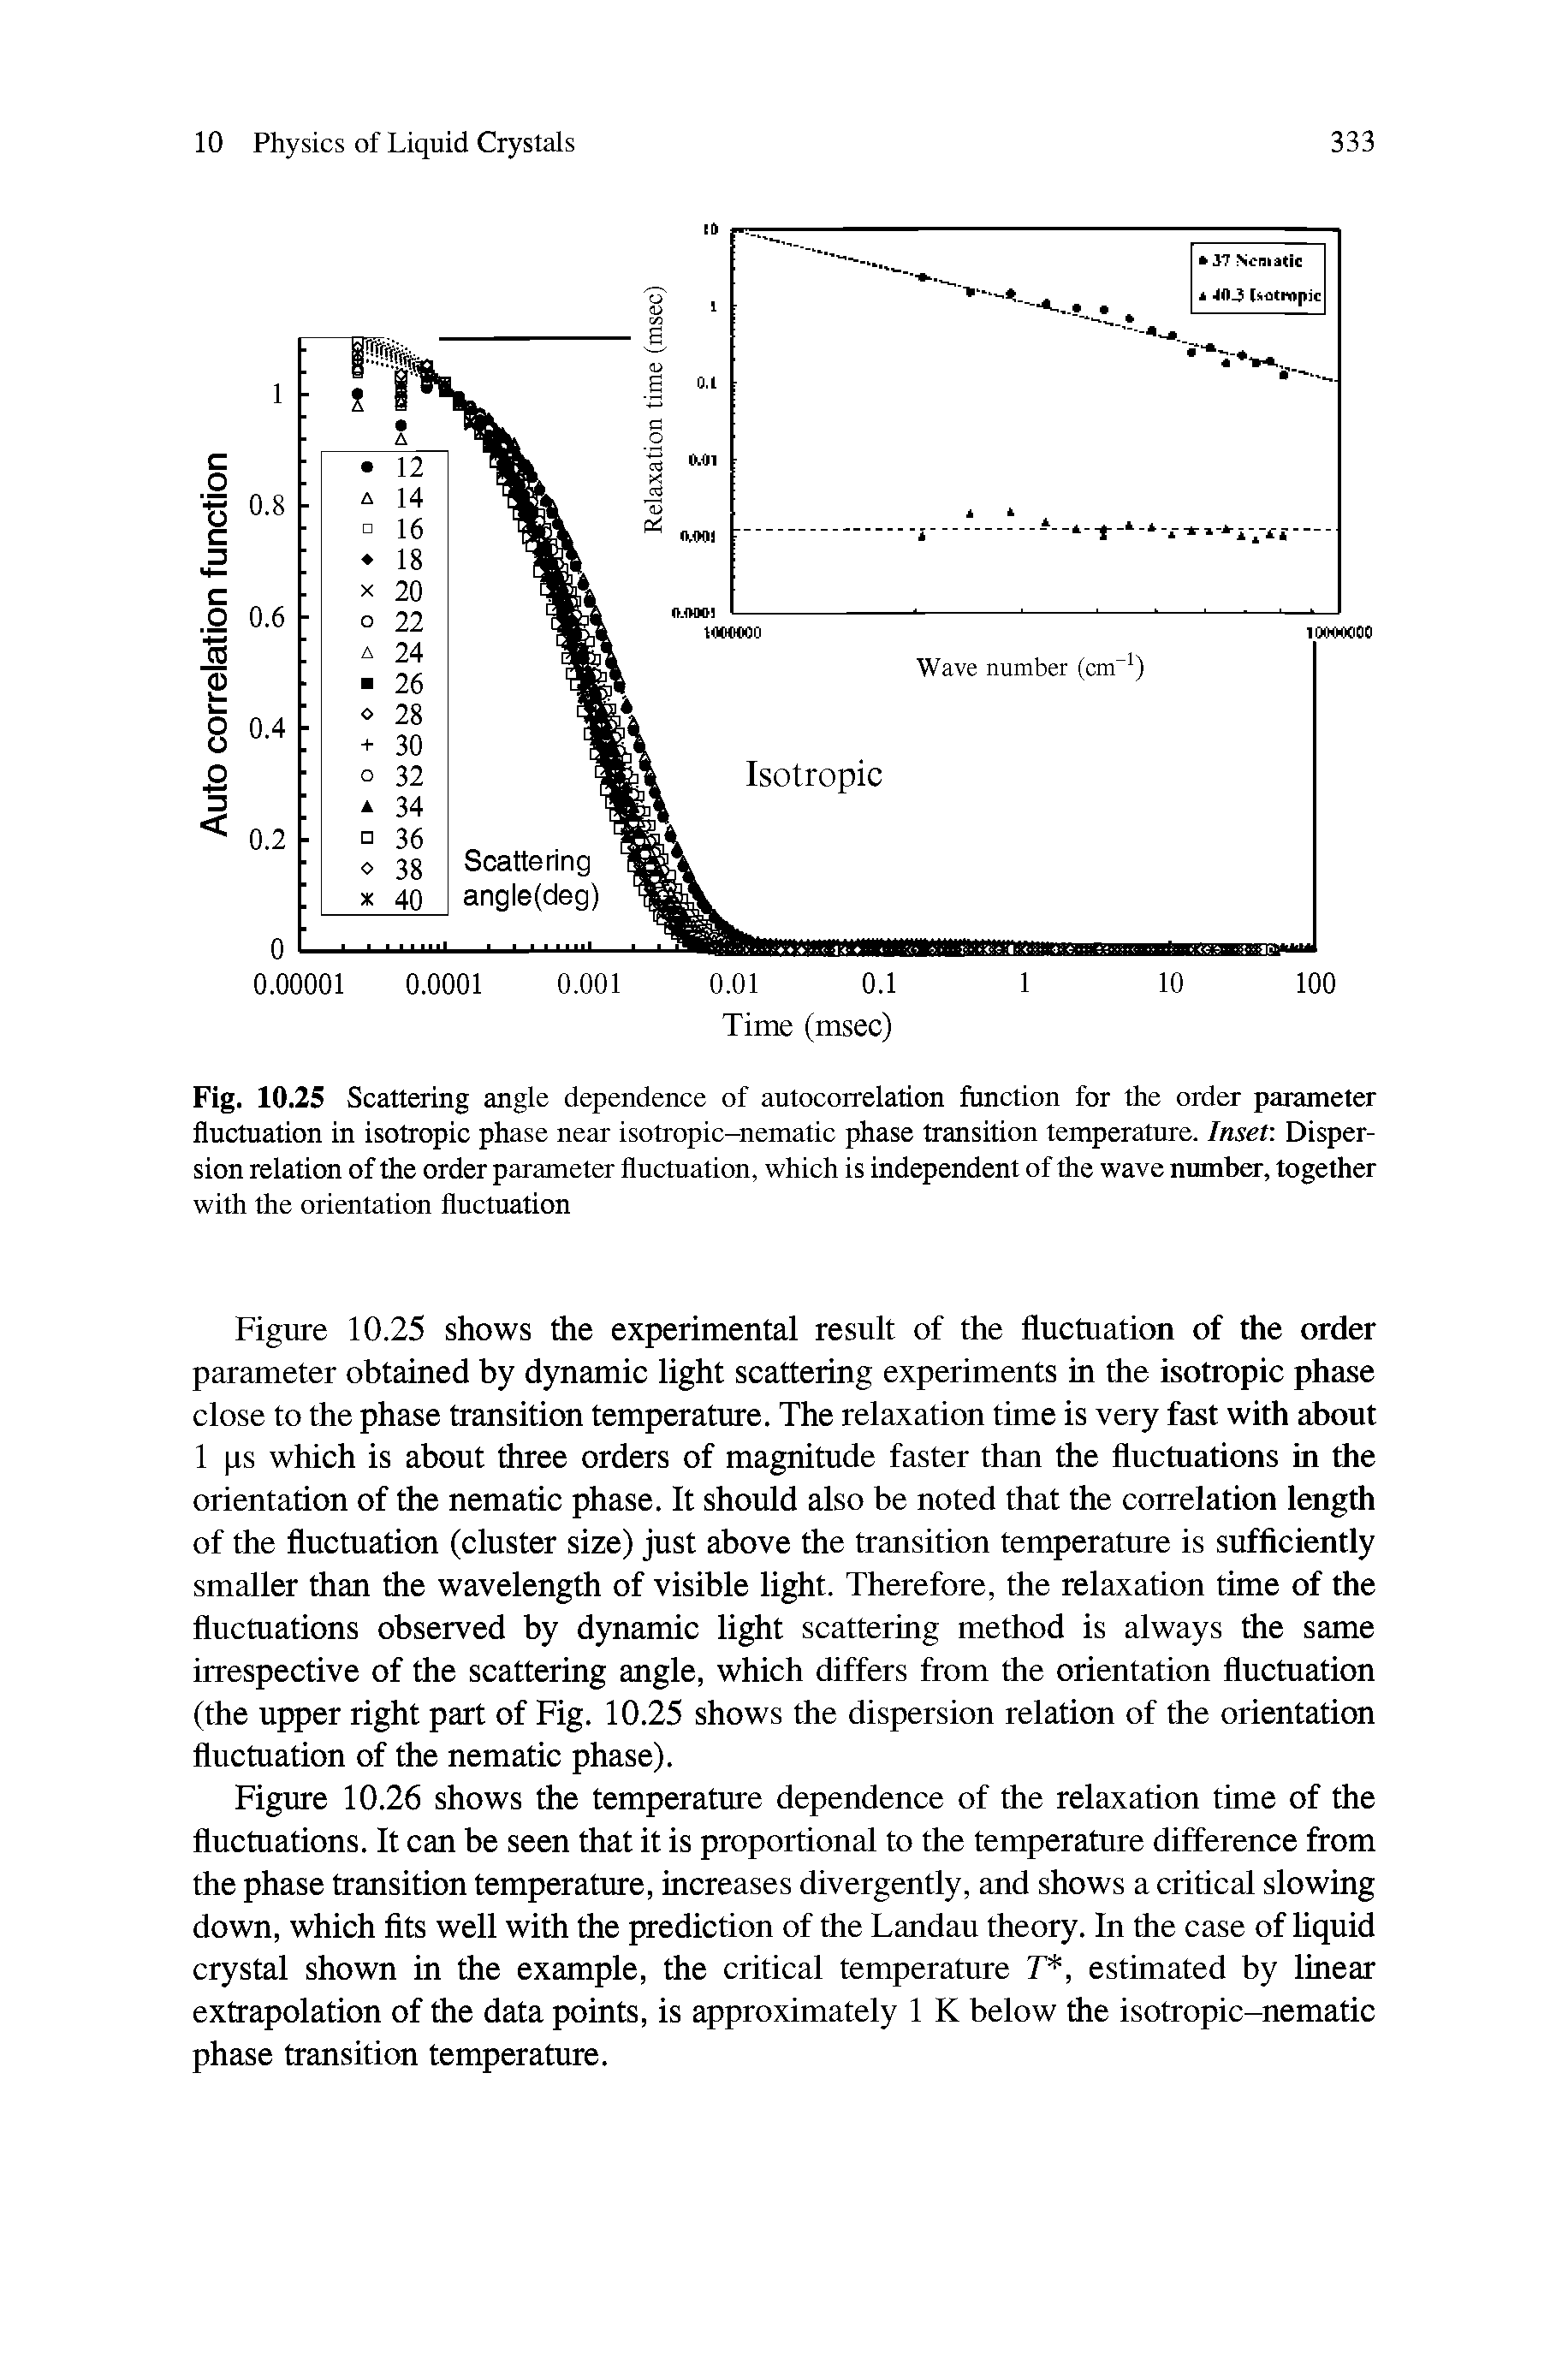 Fig. 10.25 Scattering angle dependence of autocorrelation function for the order parameter fluctuation in isotropic phase near isotropic-nematic phase transition temperature. Inset Dispersion relation of the order parameter fluctuation, which is independent of the wave number, together with the orientation fluctuation...